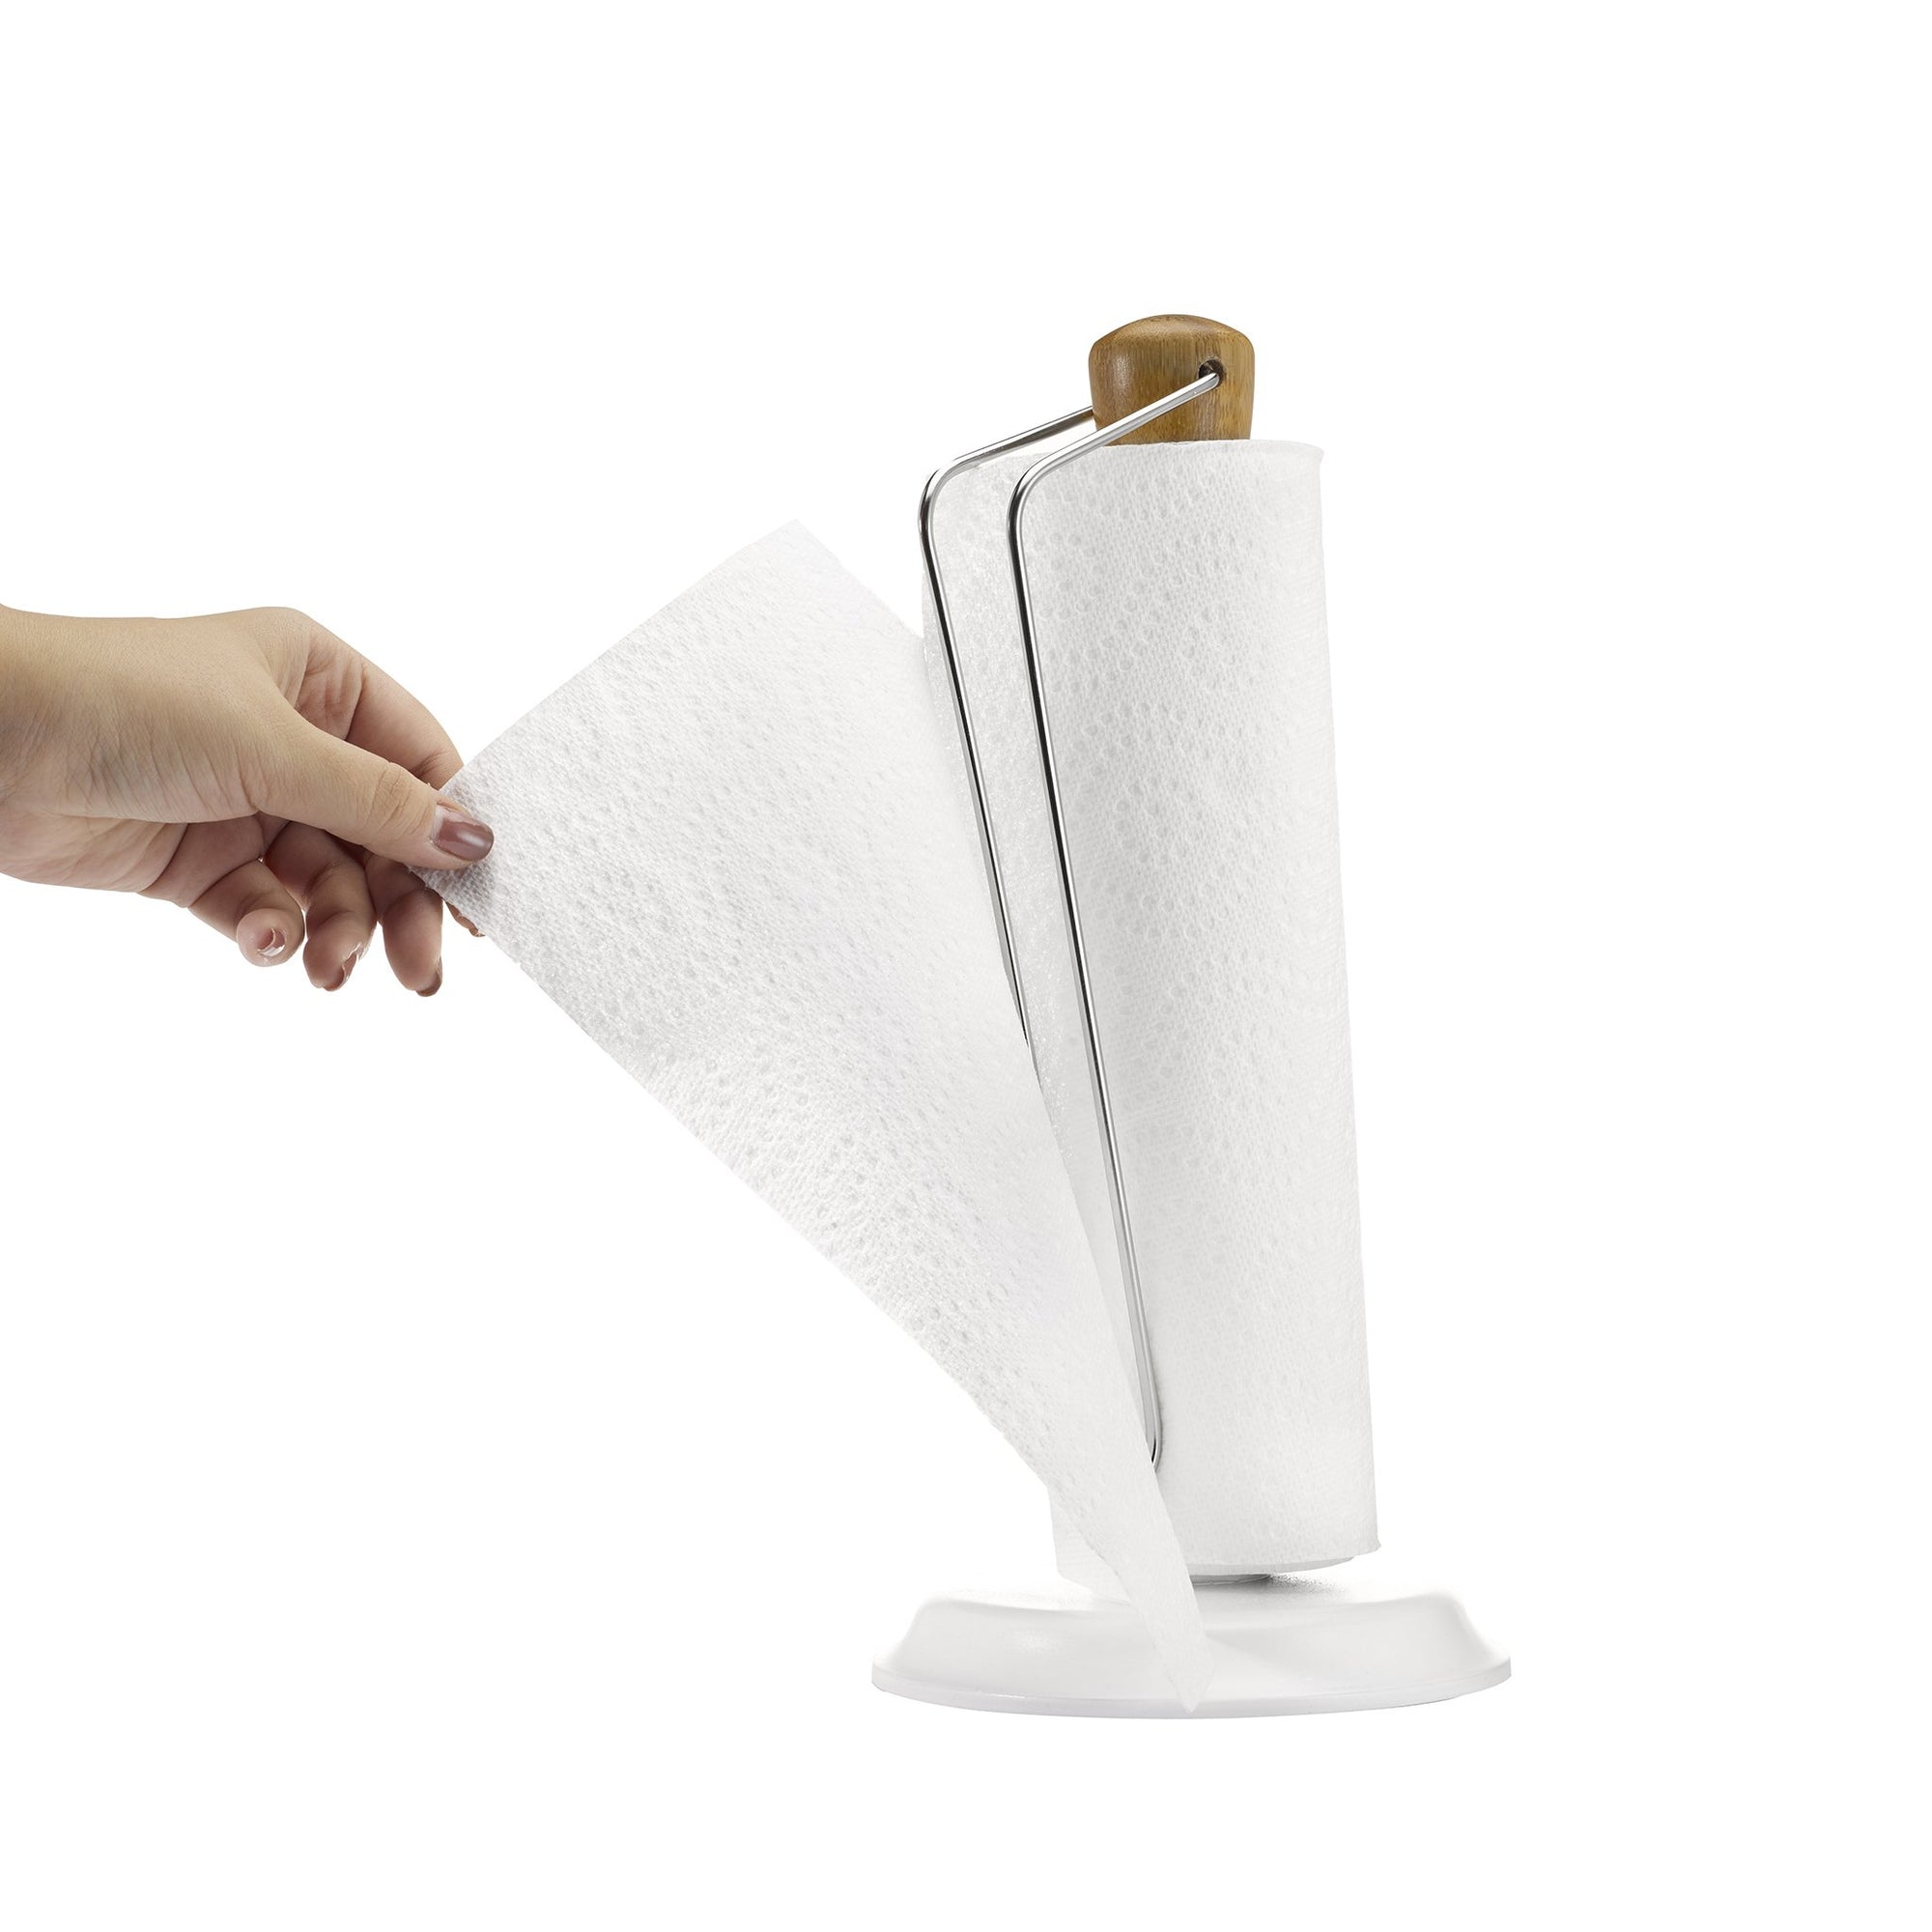 set-close series 90cm-wide couches paper roll holder